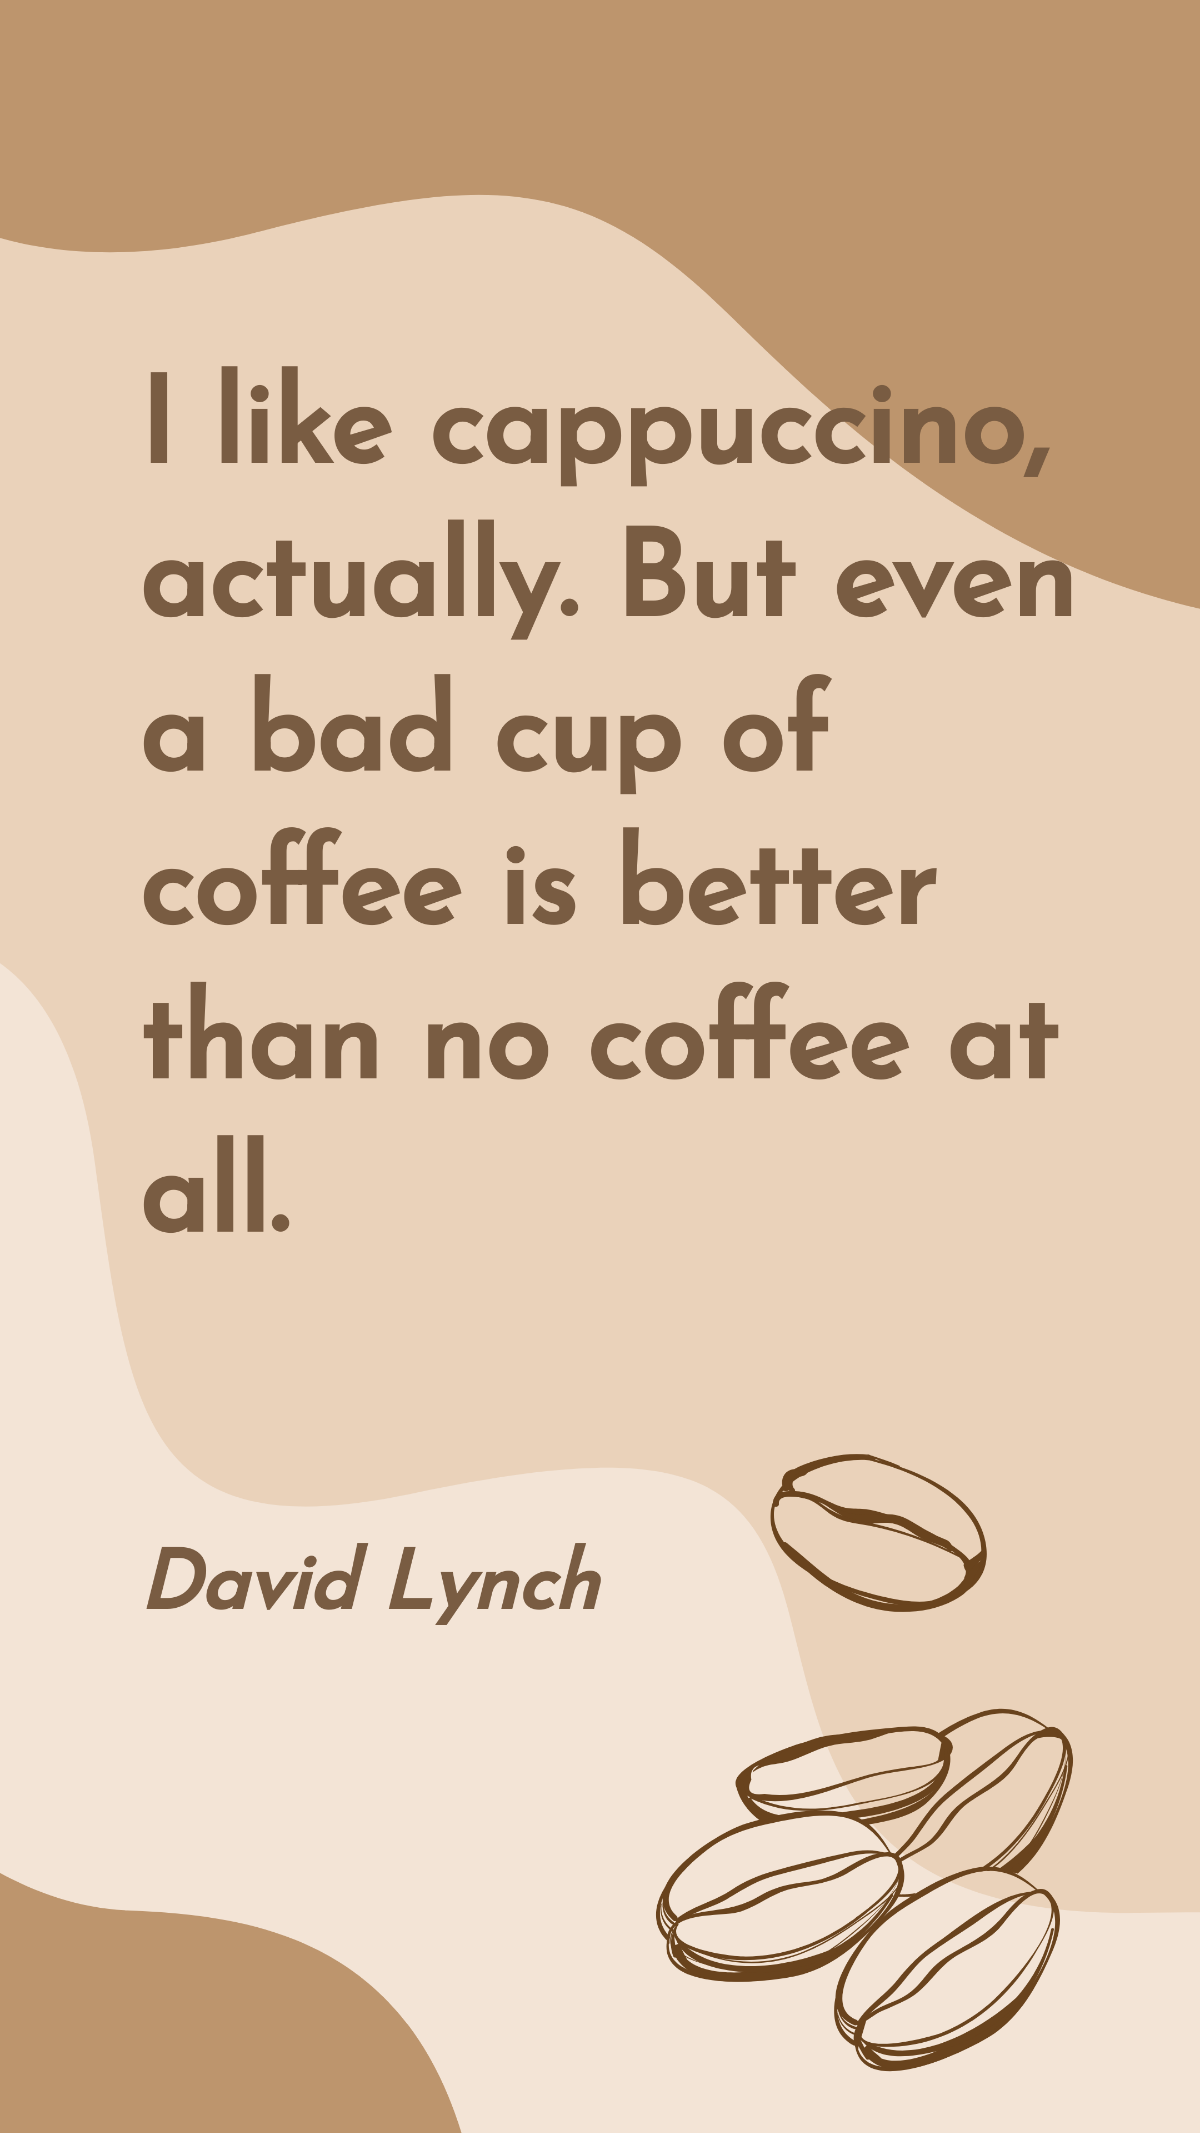 Free David Lynch - I like cappuccino, actually. But even a bad cup of coffee is better than no coffee at all. Template